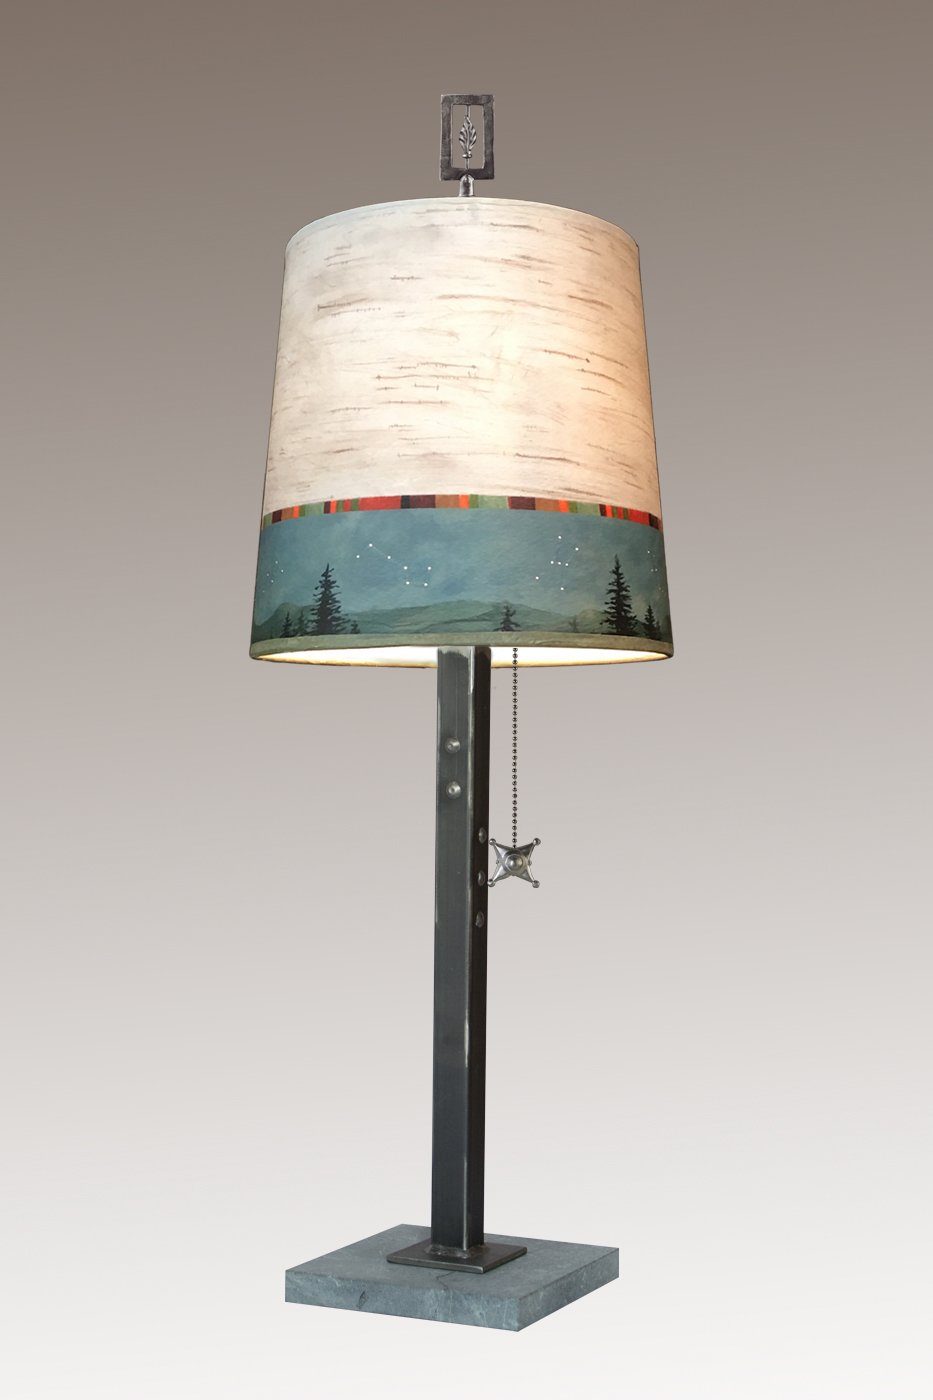 Janna Ugone & Co Table Lamps Steel Table Lamp with Medium Drum Shade in Birch Midnight